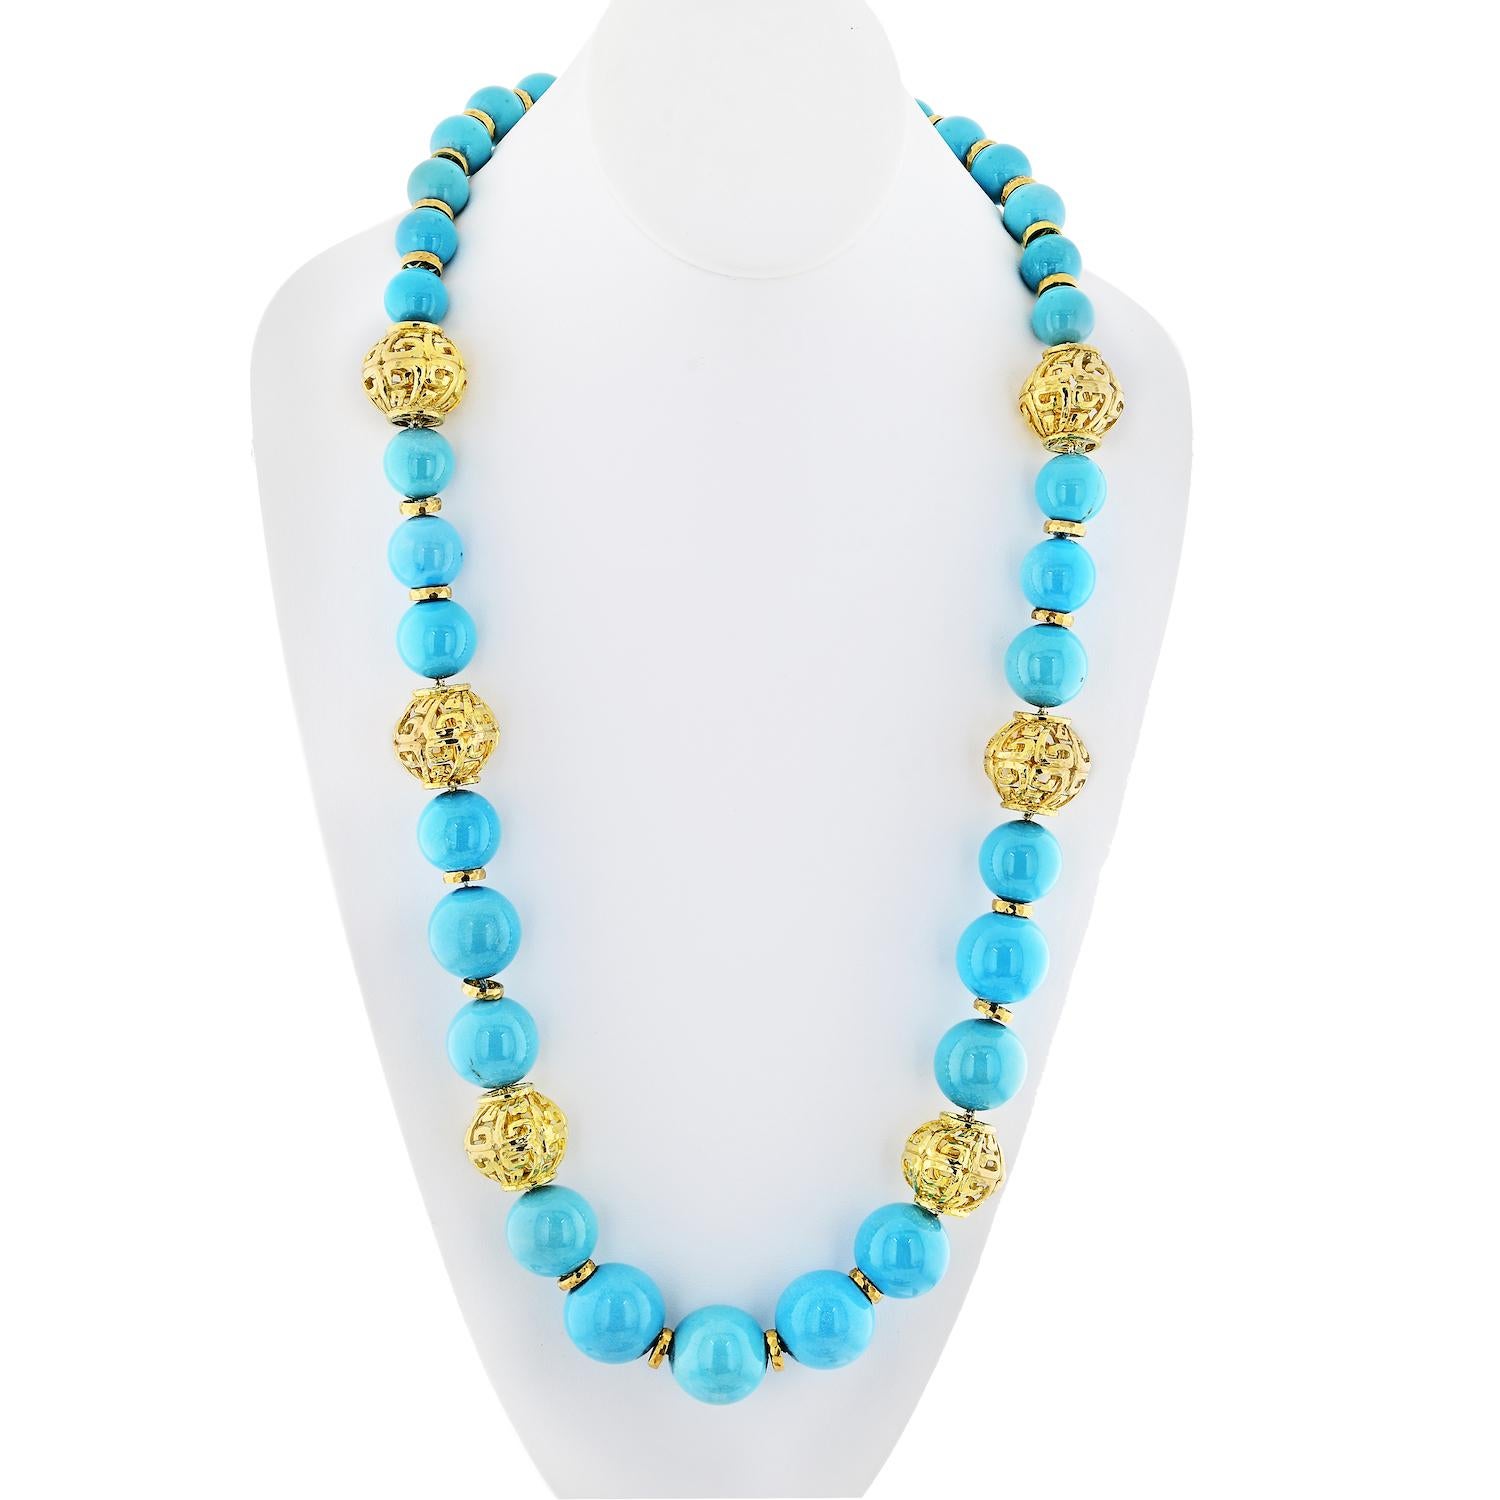 Indulge in the timeless elegance of a David Webb masterpiece with the remarkable 18K Yellow Gold Turquoise Bead Necklace, a true embodiment of luxury from the 1980s era. This exquisite necklace boasts a captivating strand of thirty-three turquoise